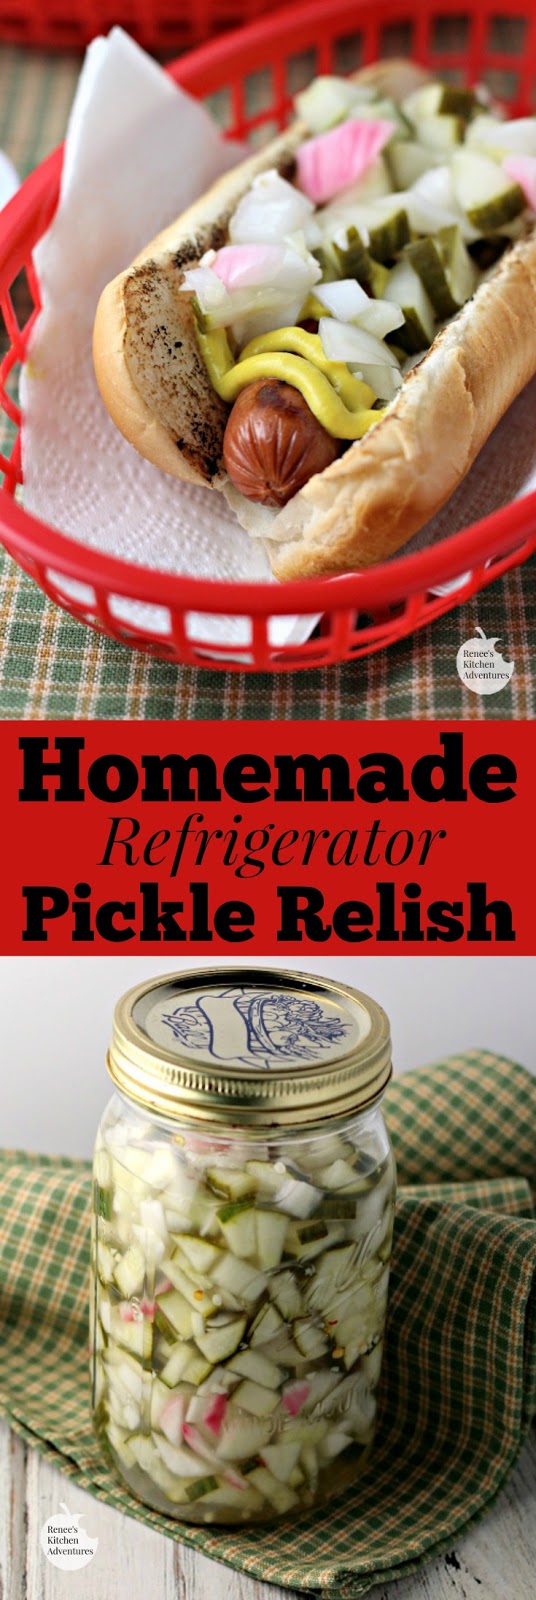 Homemade Refrigerator Pickle Relish | by Renee's Kitchen Adventures - quick and easy recipe for refrigerator pickle relish that makes a great topping for hot dogs, burgers and more!  Great homemade relish for your summer BBQ!  #SundaySupper  #RKArecipes